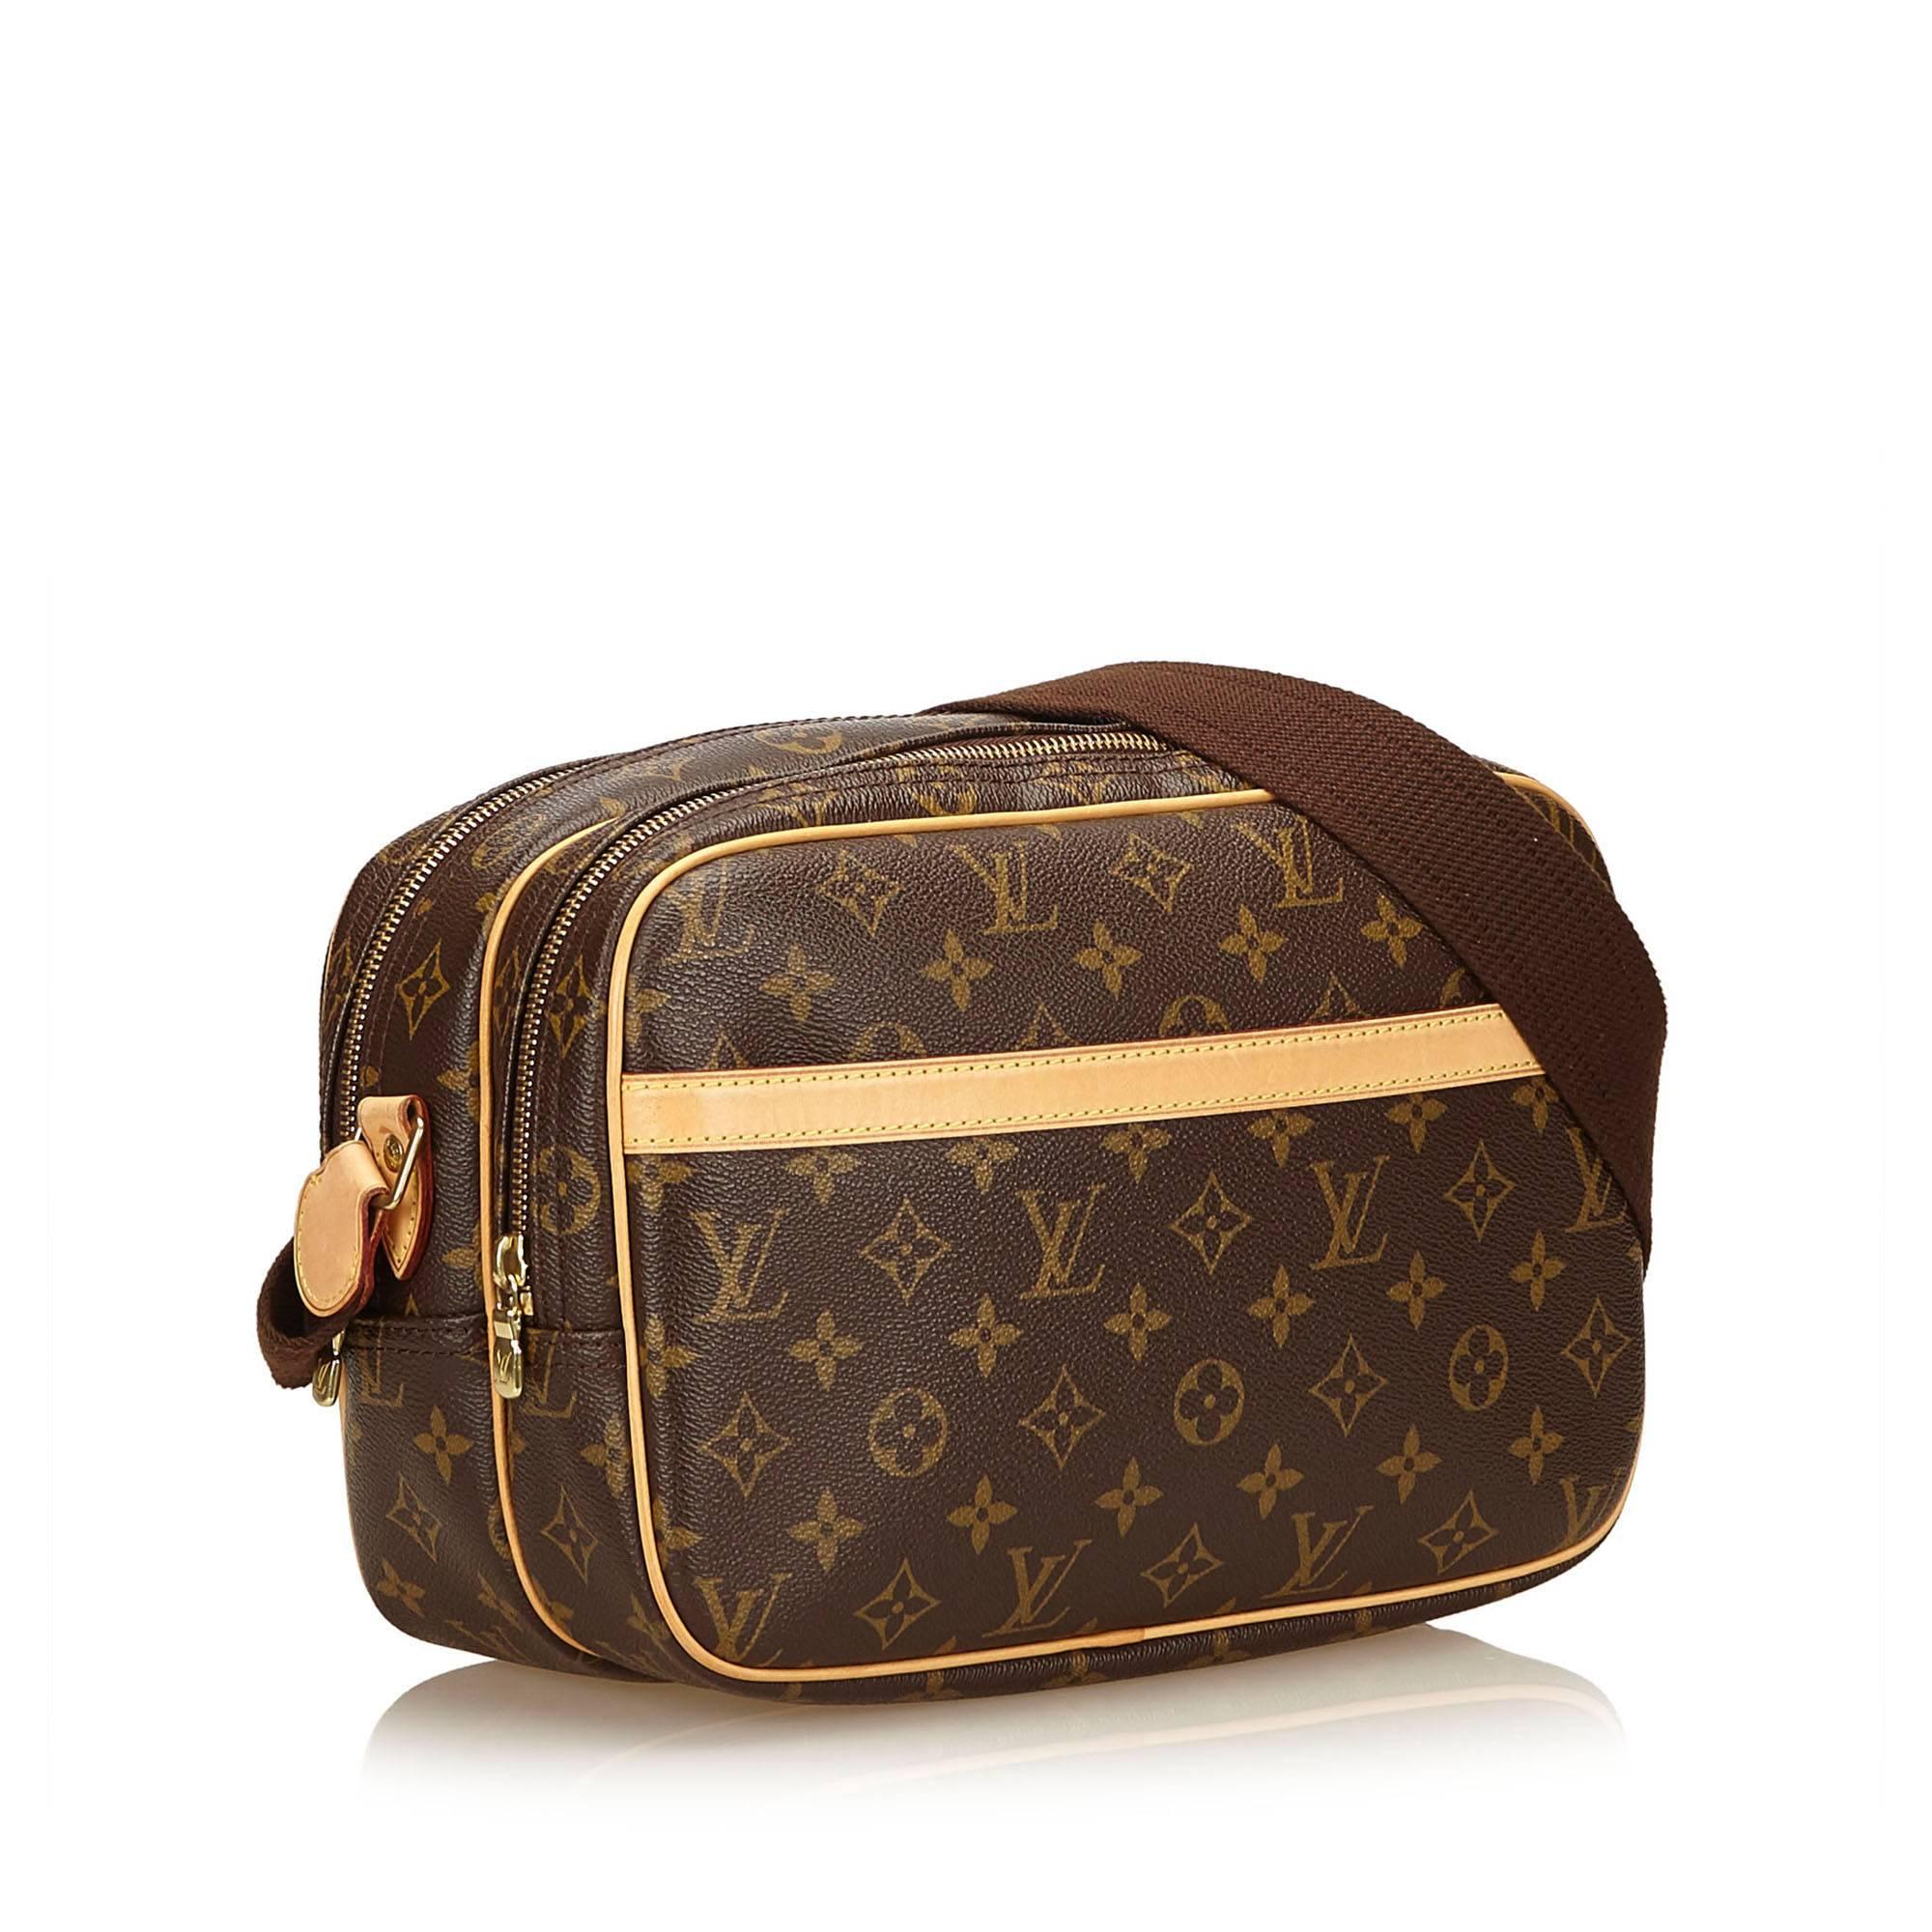 The Reporter PM features a monogram canvas body, an exterior slip pocket, top zip closures, and interior compartments. 

It carries an A condition rating.

Dimensions: 
Length 20 cm
Width 28 cm
Depth 13 cm
Shoulder Drop 30 cm

Inclusions: No longer